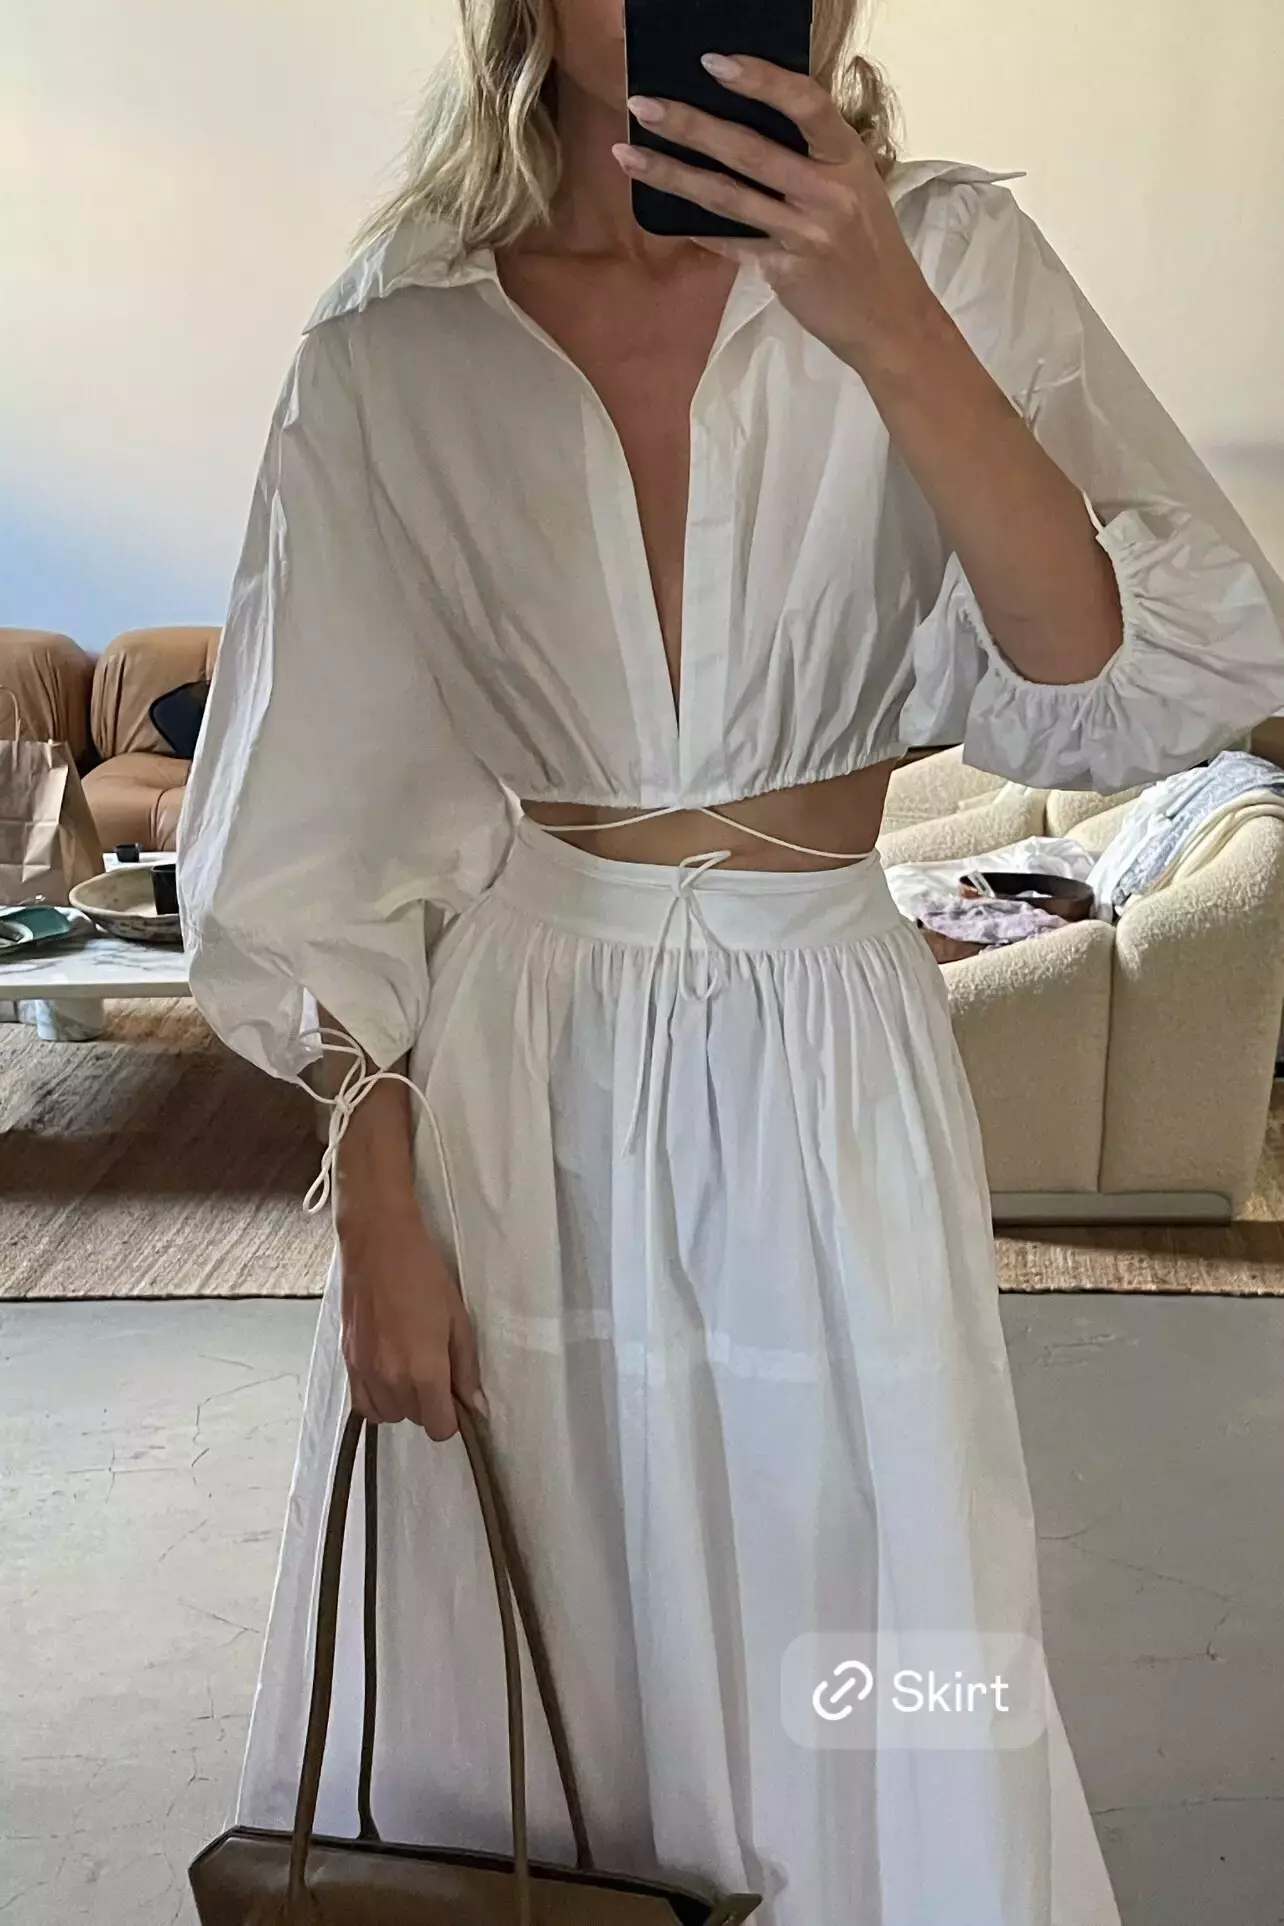 Elsa Hosk Dazzles In Chic White Outfit On Instagram